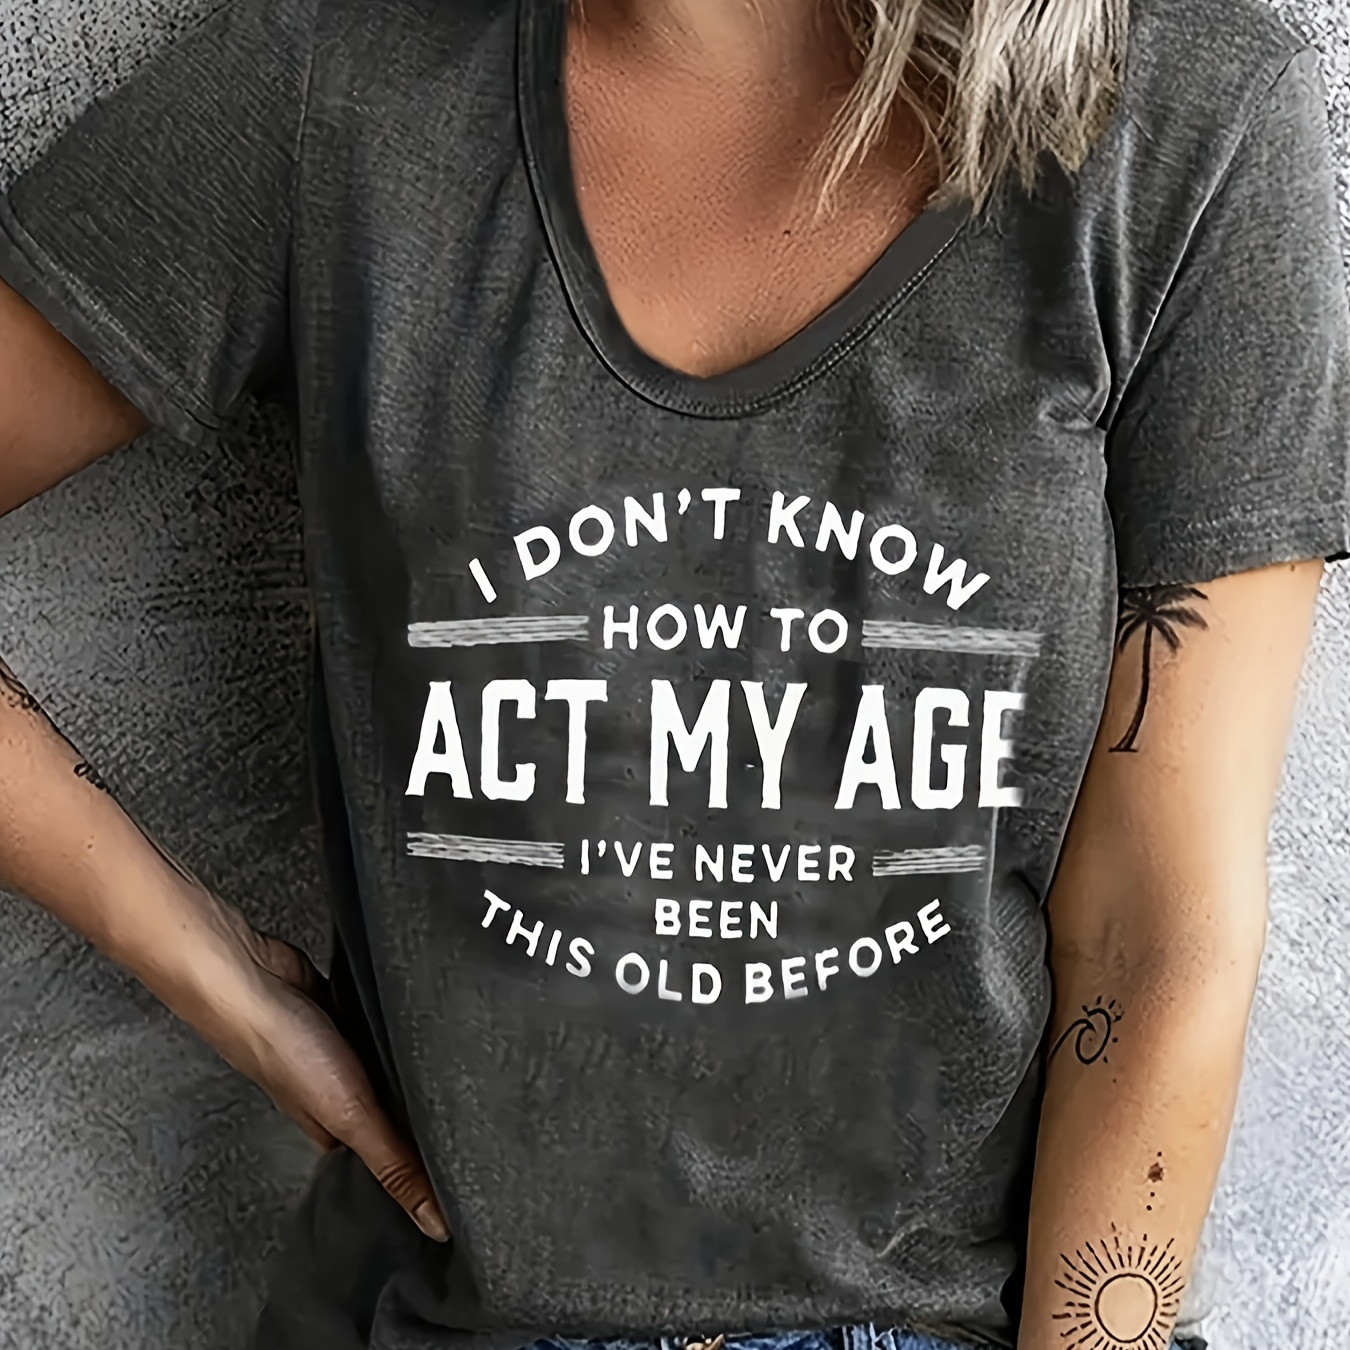 

Act My Age Print Crew Neck T-shirt, Casual Short Sleeve T-shirt For Summer, Women's Clothing